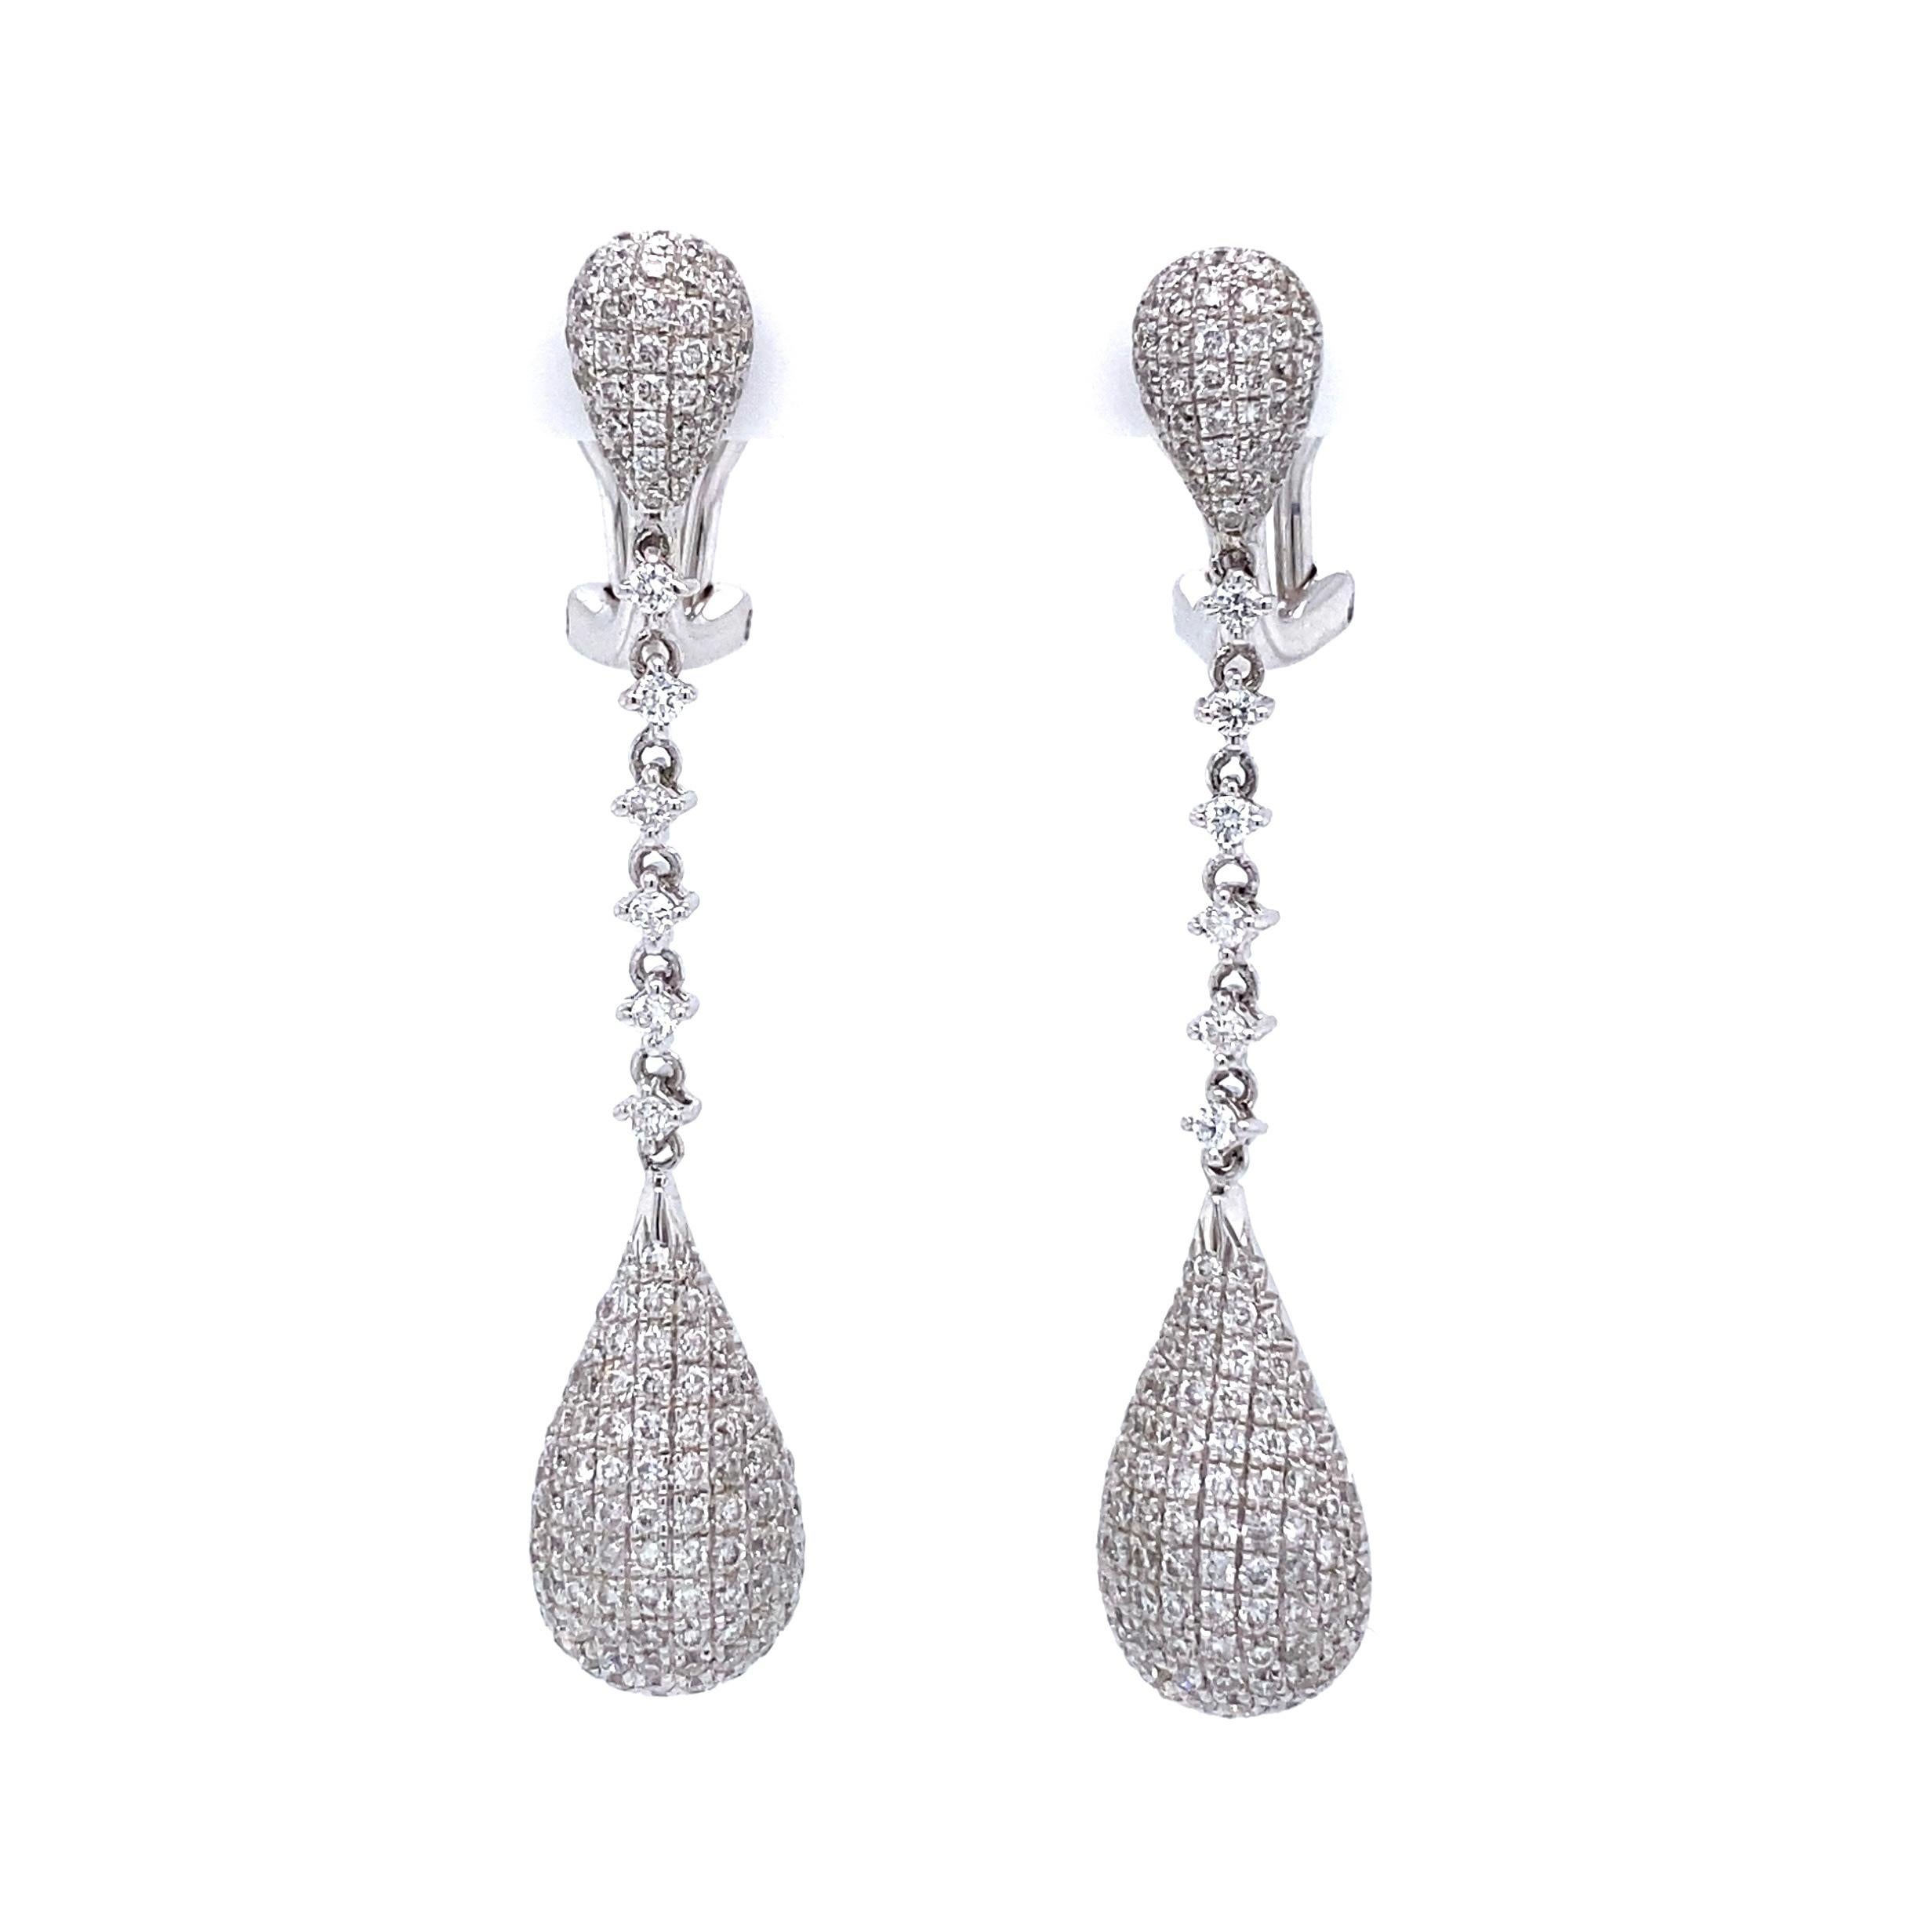 Diamond Pave Drop Awesome Gold Earrings Estate Fine Jewelry In Excellent Condition For Sale In Montreal, QC